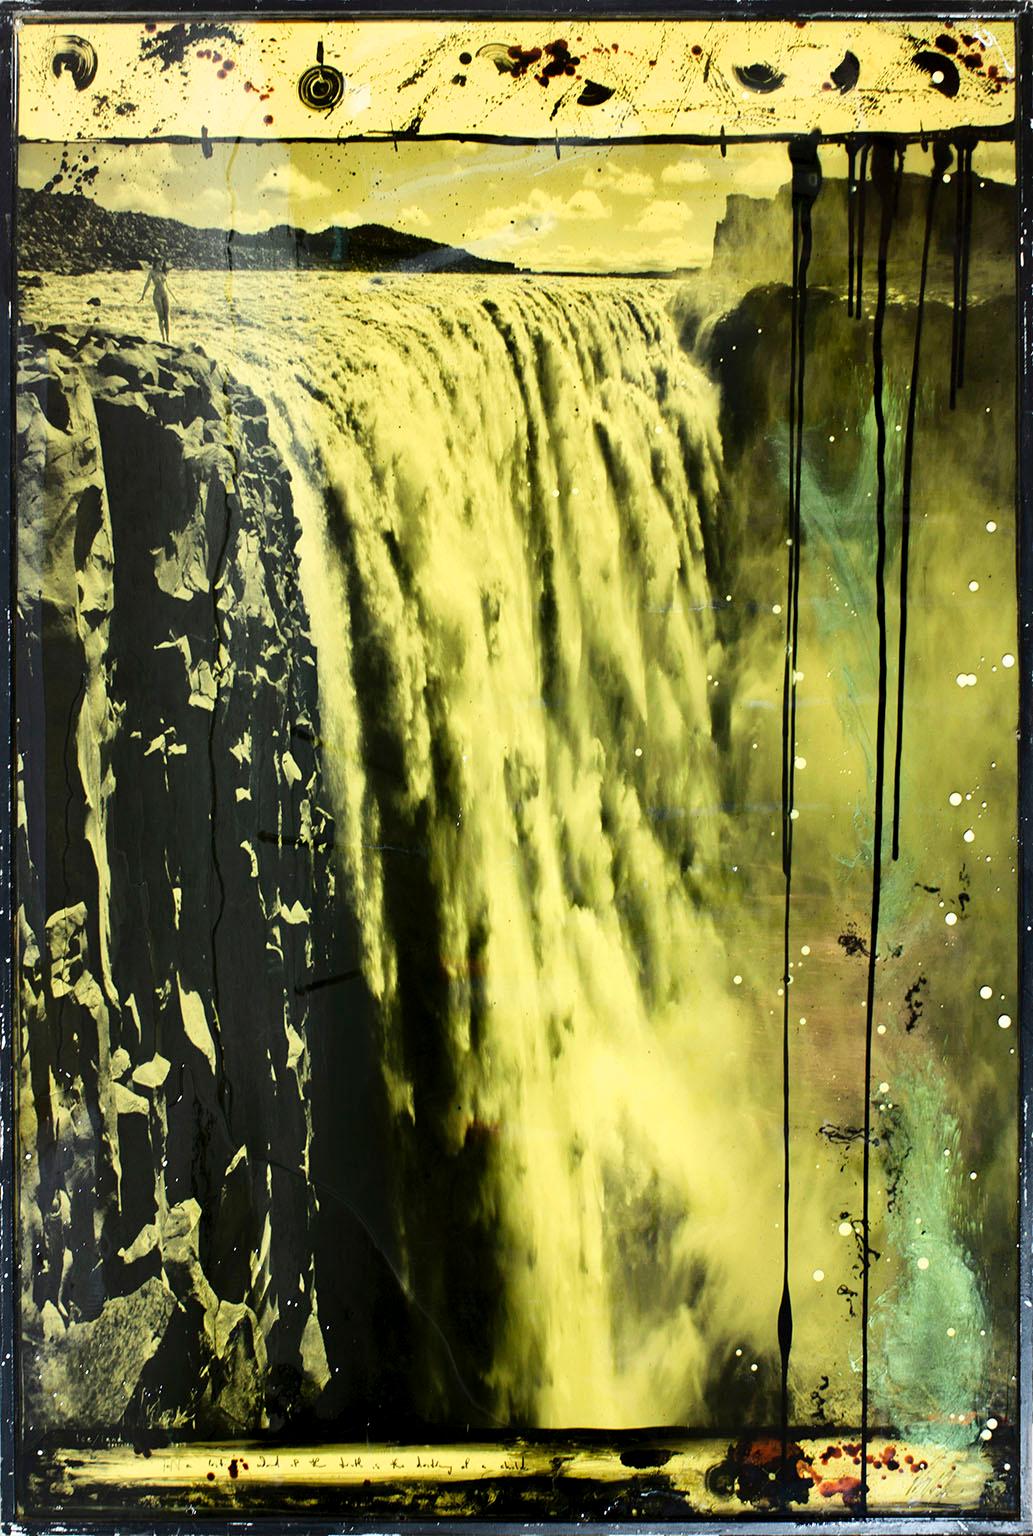 "Untitled (Waterfall Variation)" mixed media artwork by artist Raphael Mazzucco. Signed front lower right corner.